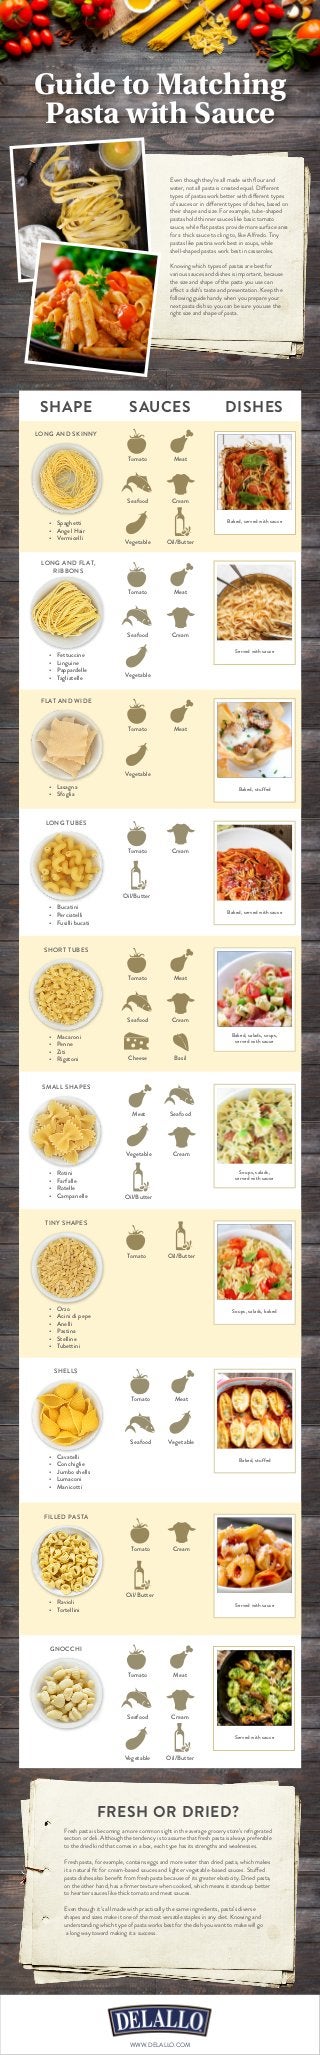 Guide to Matching
Pasta with Sauce
Even though they’re all made with flour and
water, not all pasta is created equal. Different
types of pastas work better with different types
of sauces or in different types of dishes, based on
their shape and size. For example, tube-shaped
pastas hold thinner sauces like basic tomato
sauce, while flat pastas provide more surface area
for a thick sauce to cling to, like Alfredo. Tiny
pastas like pastina work best in soups, while
shell-shaped pastas work best in casseroles.
Knowing which types of pastas are best for
various sauces and dishes is important, because
the size and shape of the pasta you use can
affect a dish’s taste and presentation. Keep the
following guide handy when you prepare your
next pasta dish so you can be sure you use the
right size and shape of pasta.
SHAPE
LONG AND SKINNY
•	 Spaghetti
•	 Angel Hair
•	 Vermicelli
•	 Fettuccine
•	 Linguine
•	 Pappardelle
•	 Tagliatelle
Tomato
Tomato
Tomato
Tomato
Seafood
Seafood
Vegetable
Vegetable
Vegetable
Meat
Meat
Meat
Cream
Cream
Cream
Oil/Butter
Oil/Butter
•	 Lasagna
•	 Sfoglia
•	 Bucatini
•	 Perciatelli
•	 Fusilli bucati
•	 Macaroni
•	 Penne
•	 Ziti
•	 Rigatoni
•	 Rotini
•	 Farfalle
•	 Rotelle
•	 Campanelle
•	 Orzo
•	 Acini di pepe
•	 Anelli
•	 Pastina
•	 Stelline
•	 Tubettini
•	 Ravioli
•	 Tortellini
•	 Cavatelli
•	 Conchiglie
•	 Jumbo shells
•	 Lumaconi
•	 Manicotti
SAUCES DISHES
LONG AND FLAT,
RIBBONS
SHORT TUBES
FLAT AND WIDE
SMALL SHAPES
LONG TUBES
TINY SHAPES
FILLED PASTA
SHELLS
Tomato
Seafood
Cheese Basil
Meat
Cream
Seafood
Vegetable
Meat
Cream
Oil/Butter
Oil/Butter
Oil/Butter
Tomato
Tomato
Tomato
Seafood Vegetable
Meat
Baked, served with sauce
Baked, stuffed
Baked, salads, soups,
served with sauce
Soups, salads, baked
Served with sauce
Served with sauce
Baked, served with sauce
Soups, salads,
served with sauce
Baked, stuffed
Cream
FRESH OR DRIED?
Fresh pasta is becoming a more common sight in the average grocery store’s refrigerated
section or deli. Although the tendency is to assume that fresh pasta is always preferable
to the dried kind that comes in a box, each type has its strengths and weaknesses.
Fresh pasta, for example, contains eggs and more water than dried pasta, which makes
it a natural fit for cream-based sauces and lighter vegetable-based sauces. Stuffed
pasta dishes also benefit from fresh pasta because of its greater elasticity. Dried pasta,
on the other hand, has a firmer texture when cooked, which means it stands up better
to heartier sauces like thick tomato and meat sauces.
Even though it’s all made with practically the same ingredients, pasta’s diverse
shapes and sizes make it one of the most versatile staples in any diet. Knowing and
understanding which type of pasta works best for the dish you want to make will go
a long way toward making it a success.
WWW.DELALLO.COM
GNOCCHI
Tomato
Seafood
Vegetable
Meat
Cream
Oil/Butter
Served with sauce
 